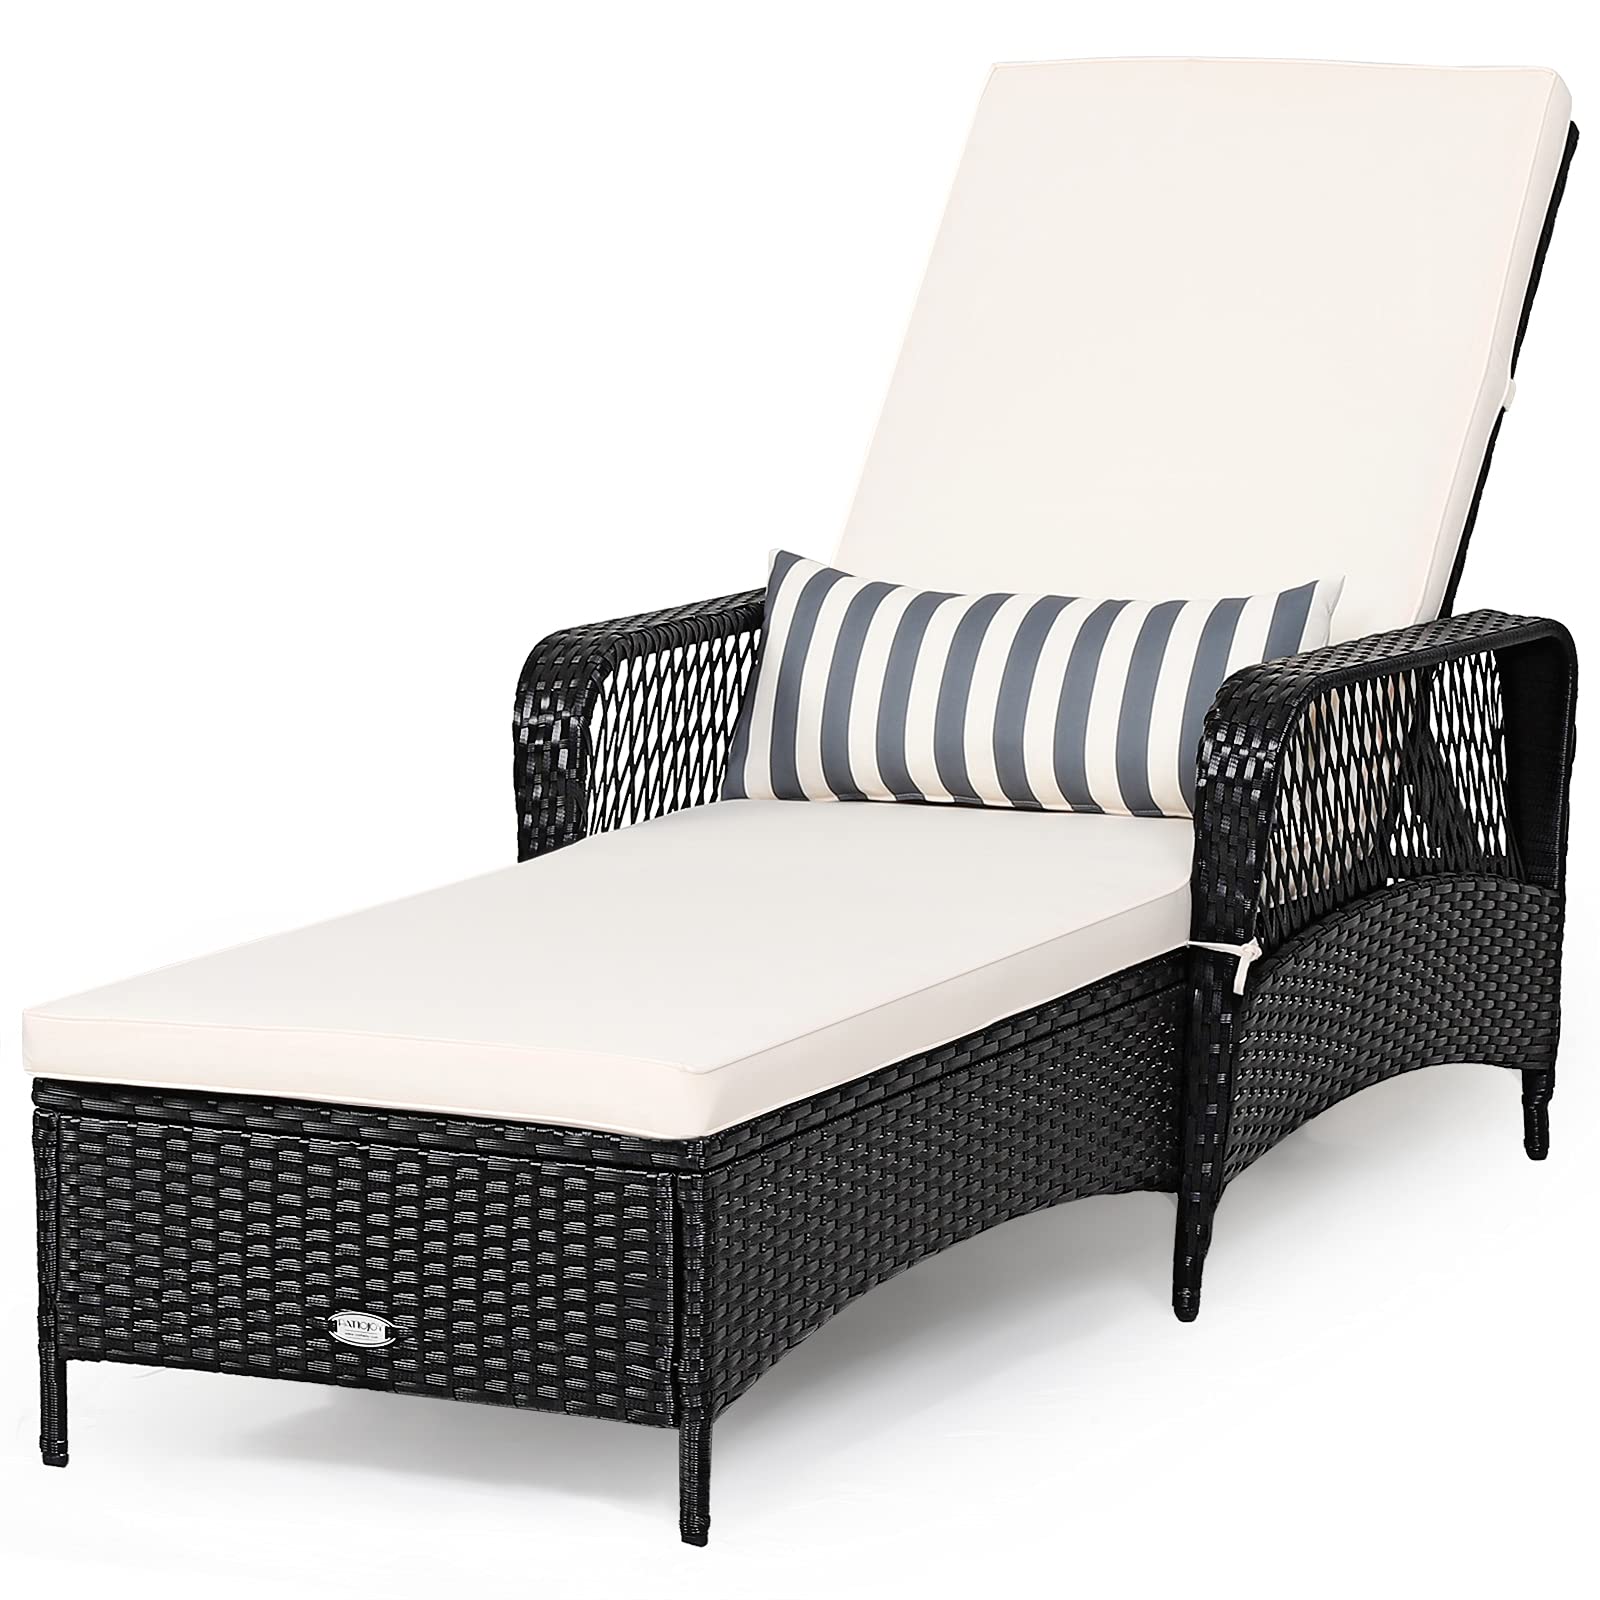 Patio Wicker Chaise Lounge Chair, Outdoor Rattan Reclining Chaise w/ 6-Gear Adjustable Backrest